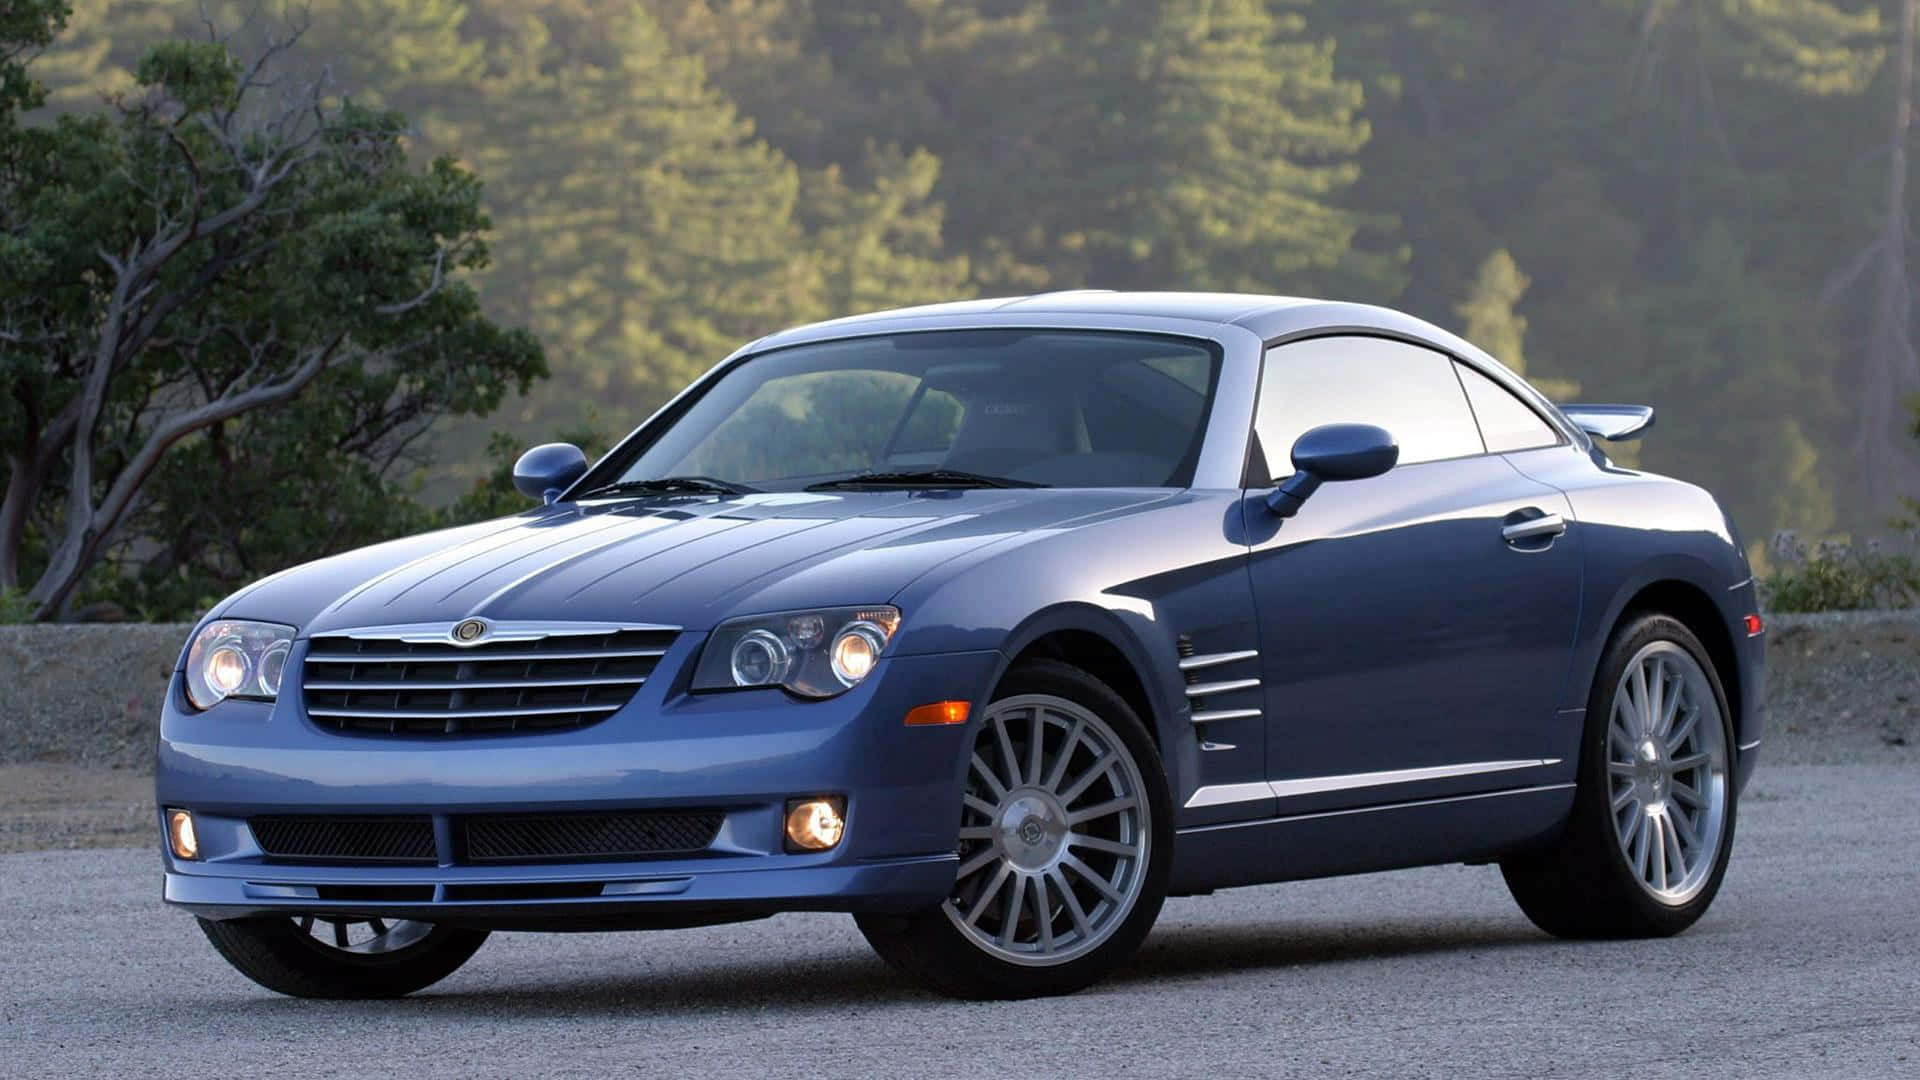 Stunning Red Chrysler Crossfire on a Scenic Drive Wallpaper